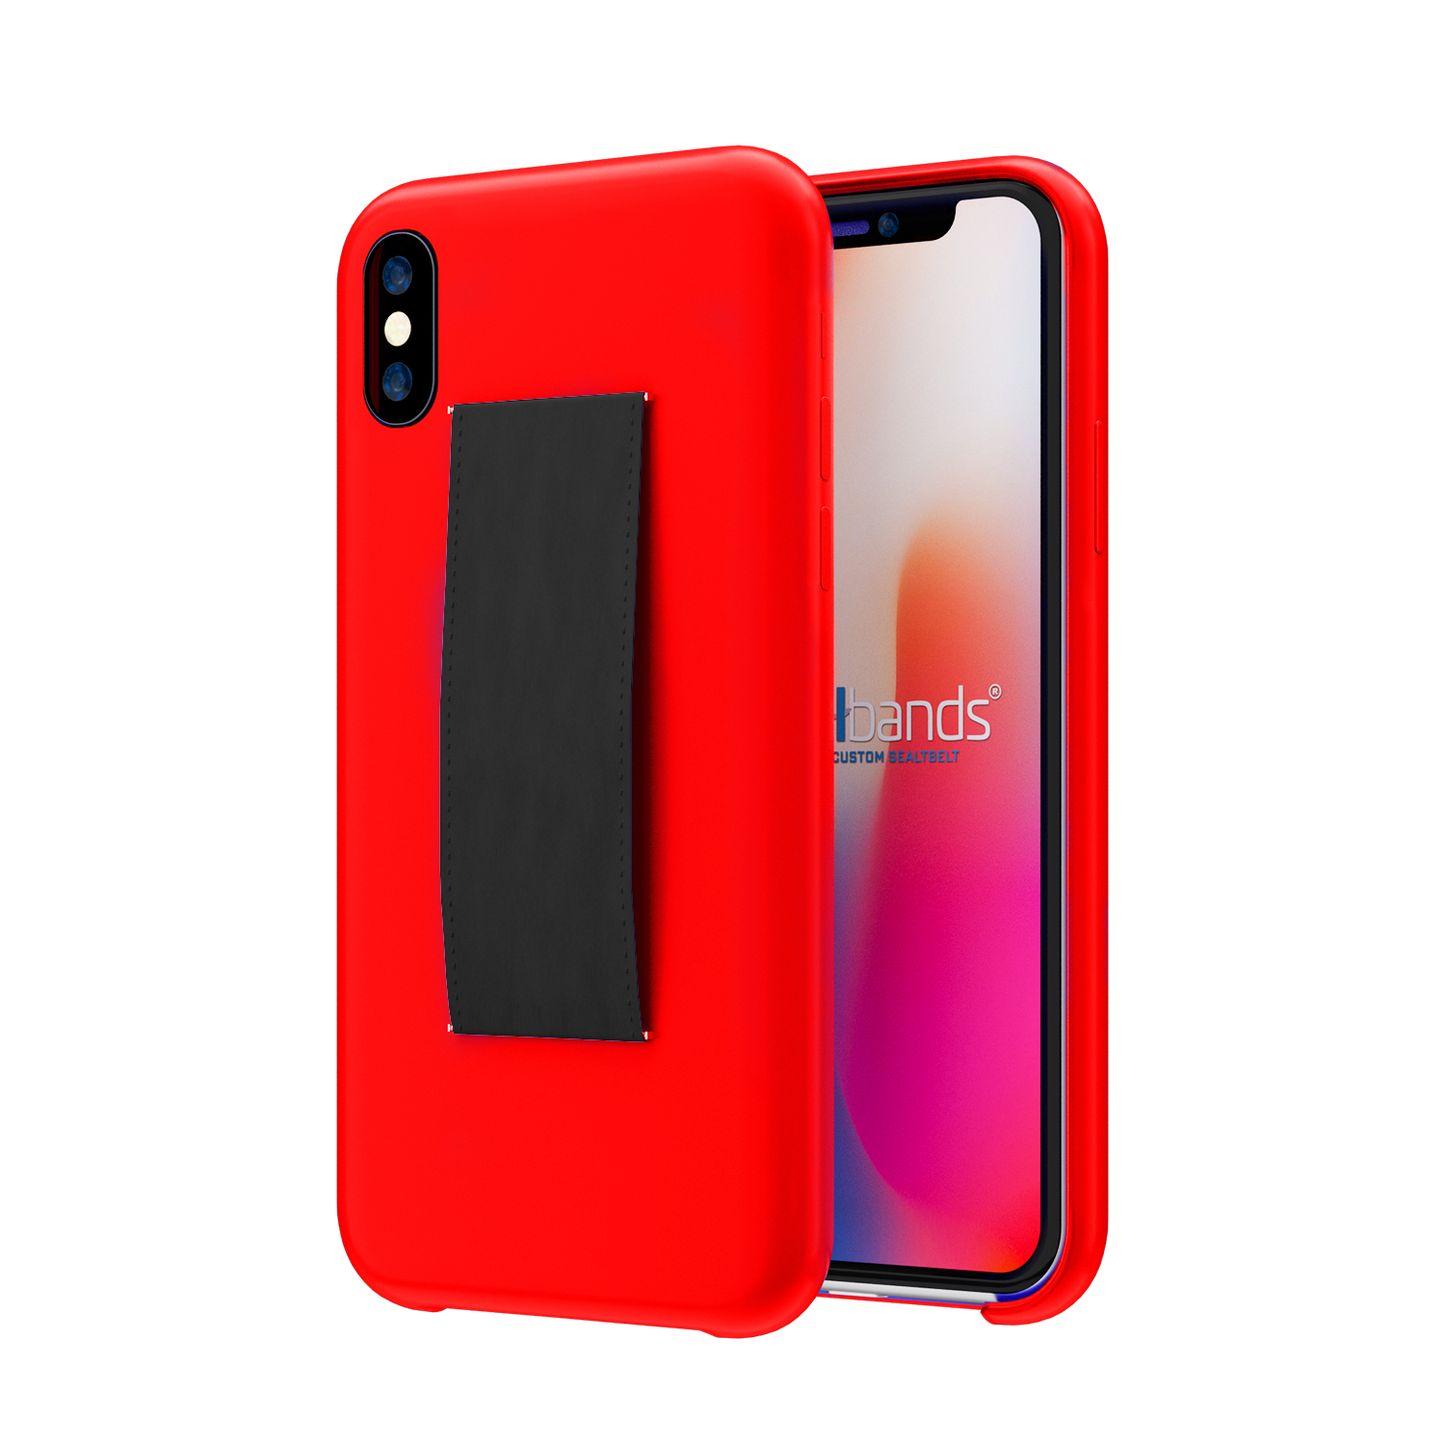 Switchbands Case & Black Band - iPhone XS MAX